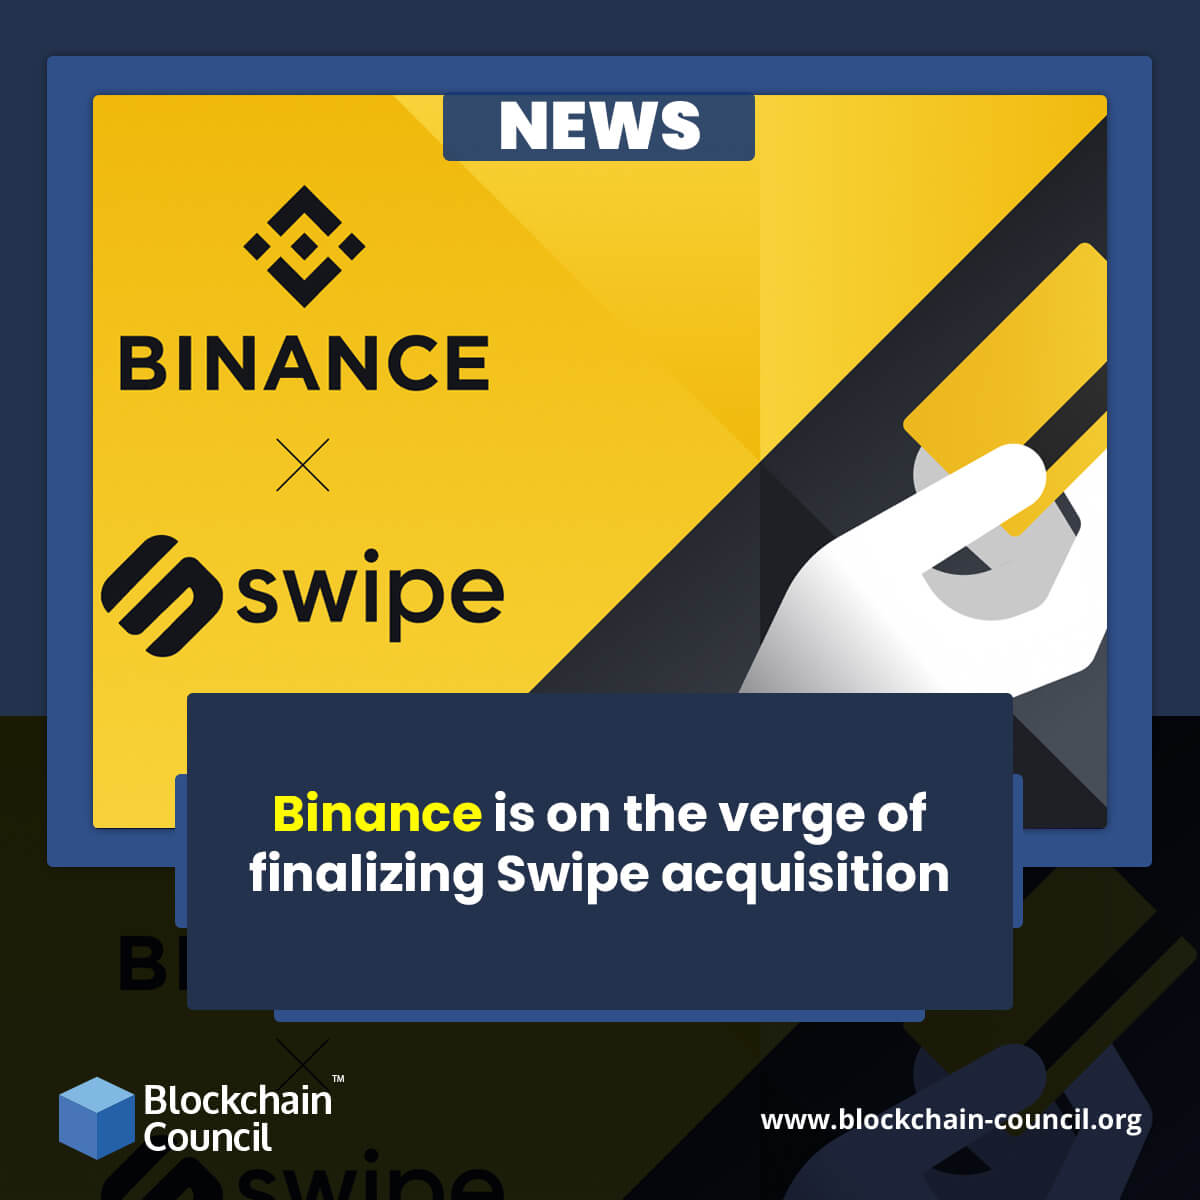 Binance is on the verge of finalizing Swipe acquisition